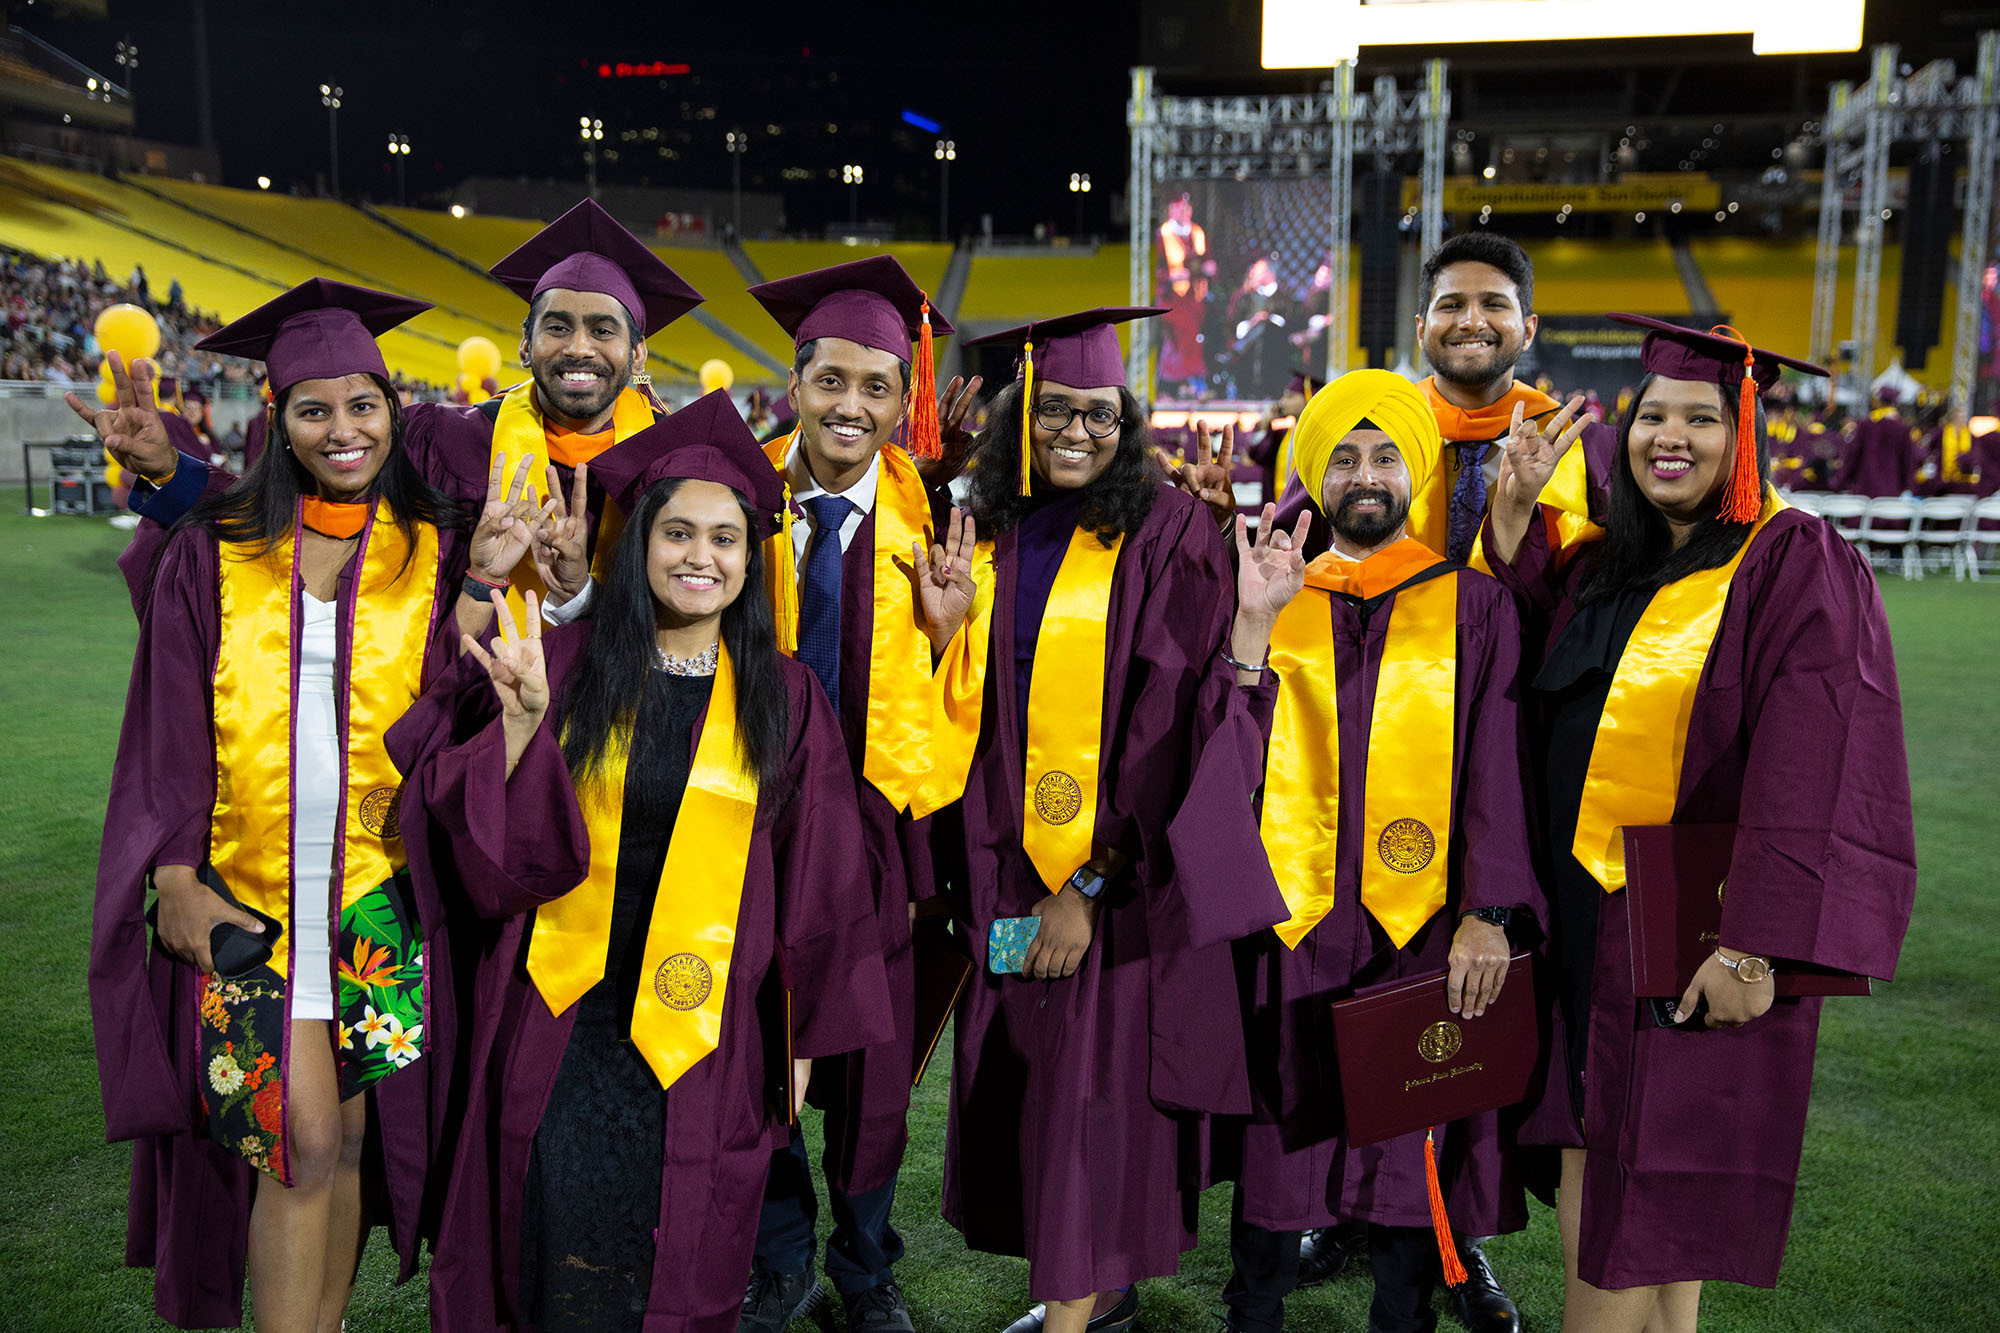 A group of 8 happy grads stand together for a group photo, each showing the ASU pitchfork school spirit gesture and smiling big for the camera on the field at Sun Devil Stadium.